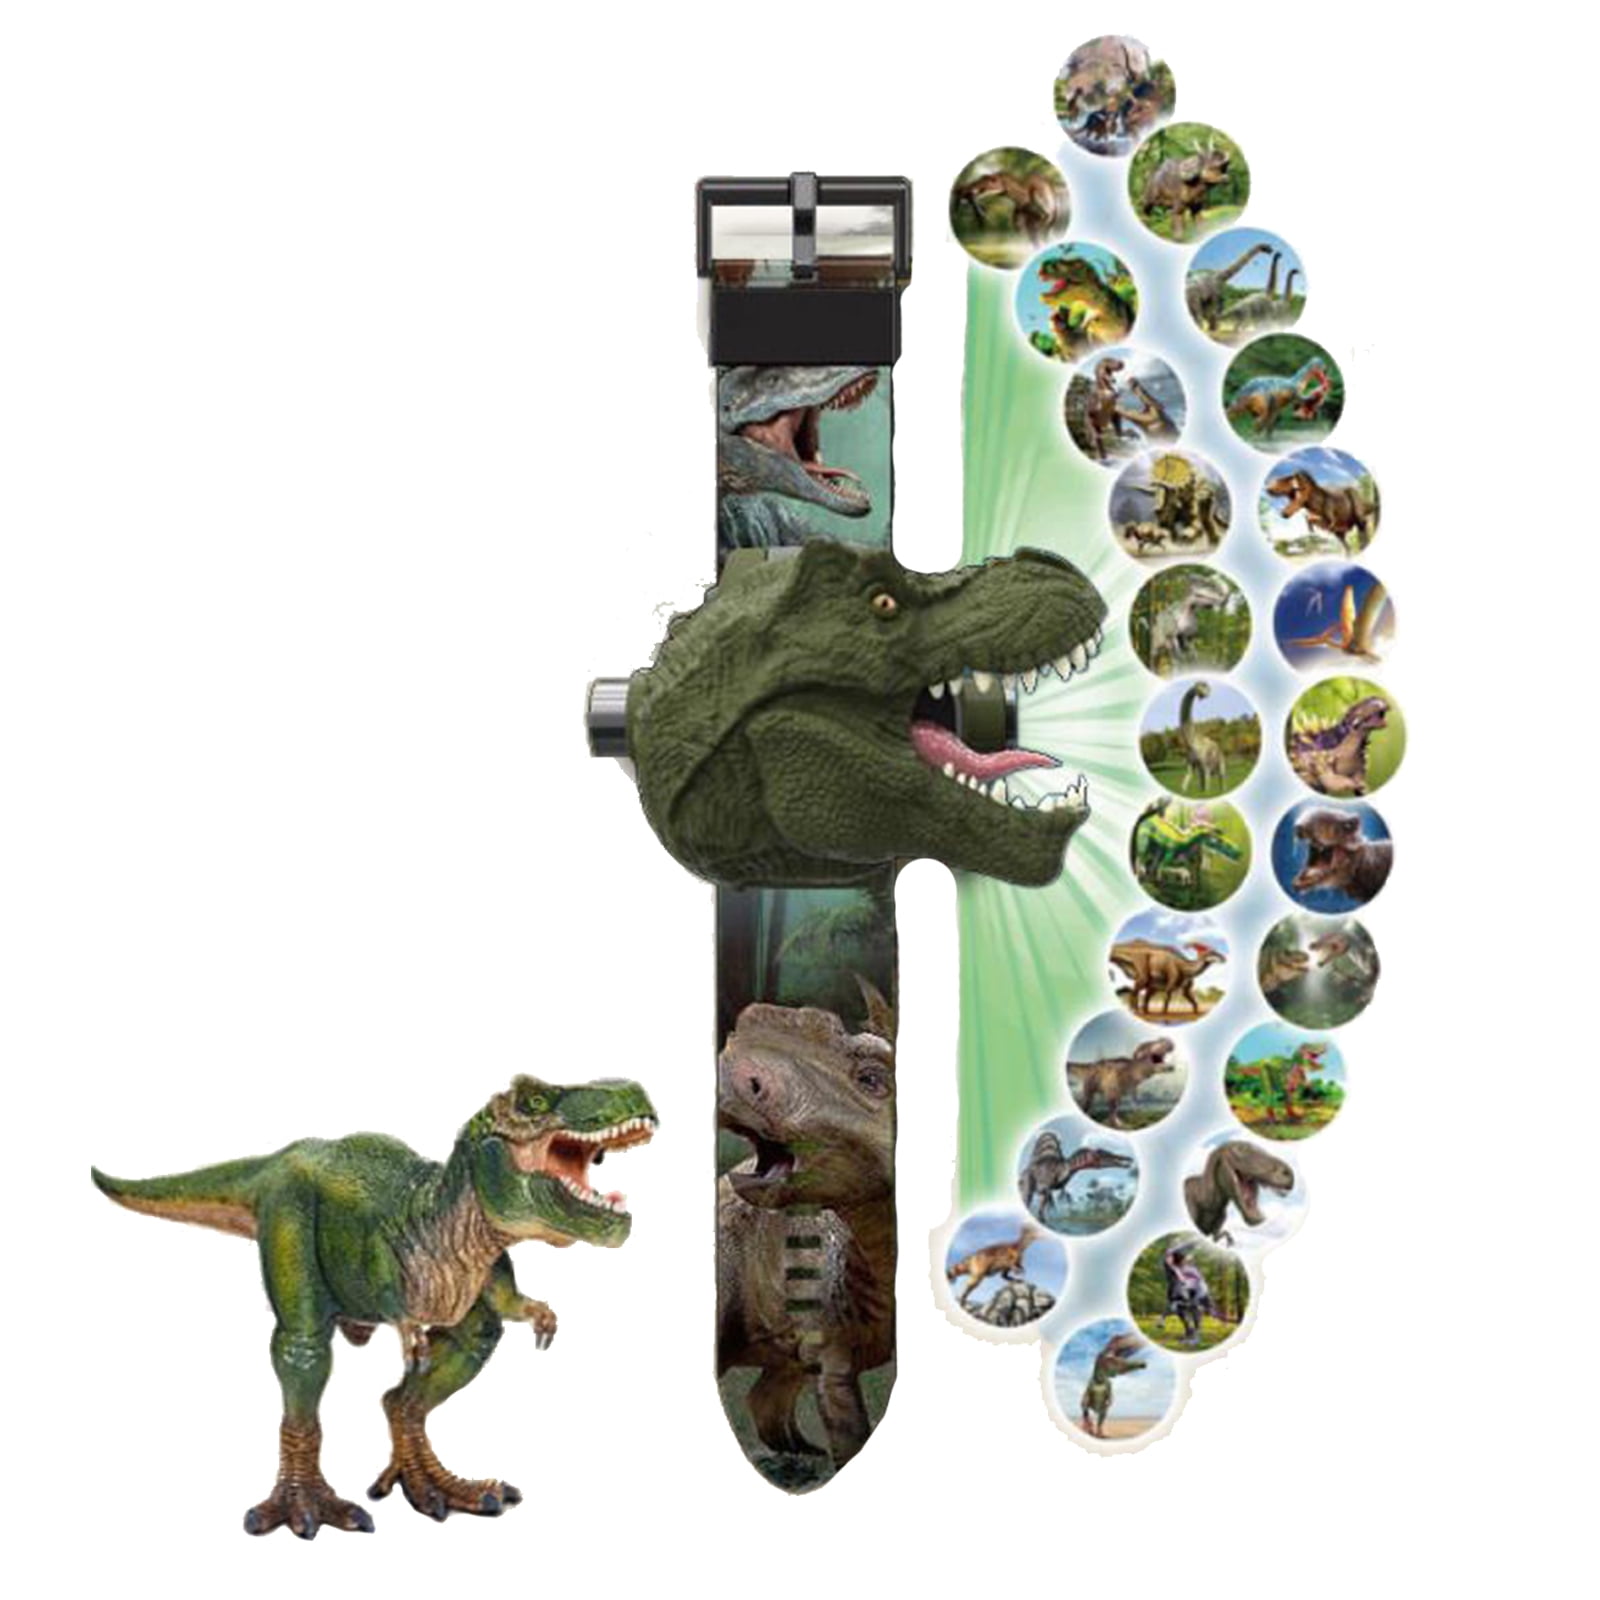 OOKWE Children’s Wrist Watch Projection Toy Dinosaur Sleep Story Shadow Toy Fine Motor Skill Training for Toddler Concen